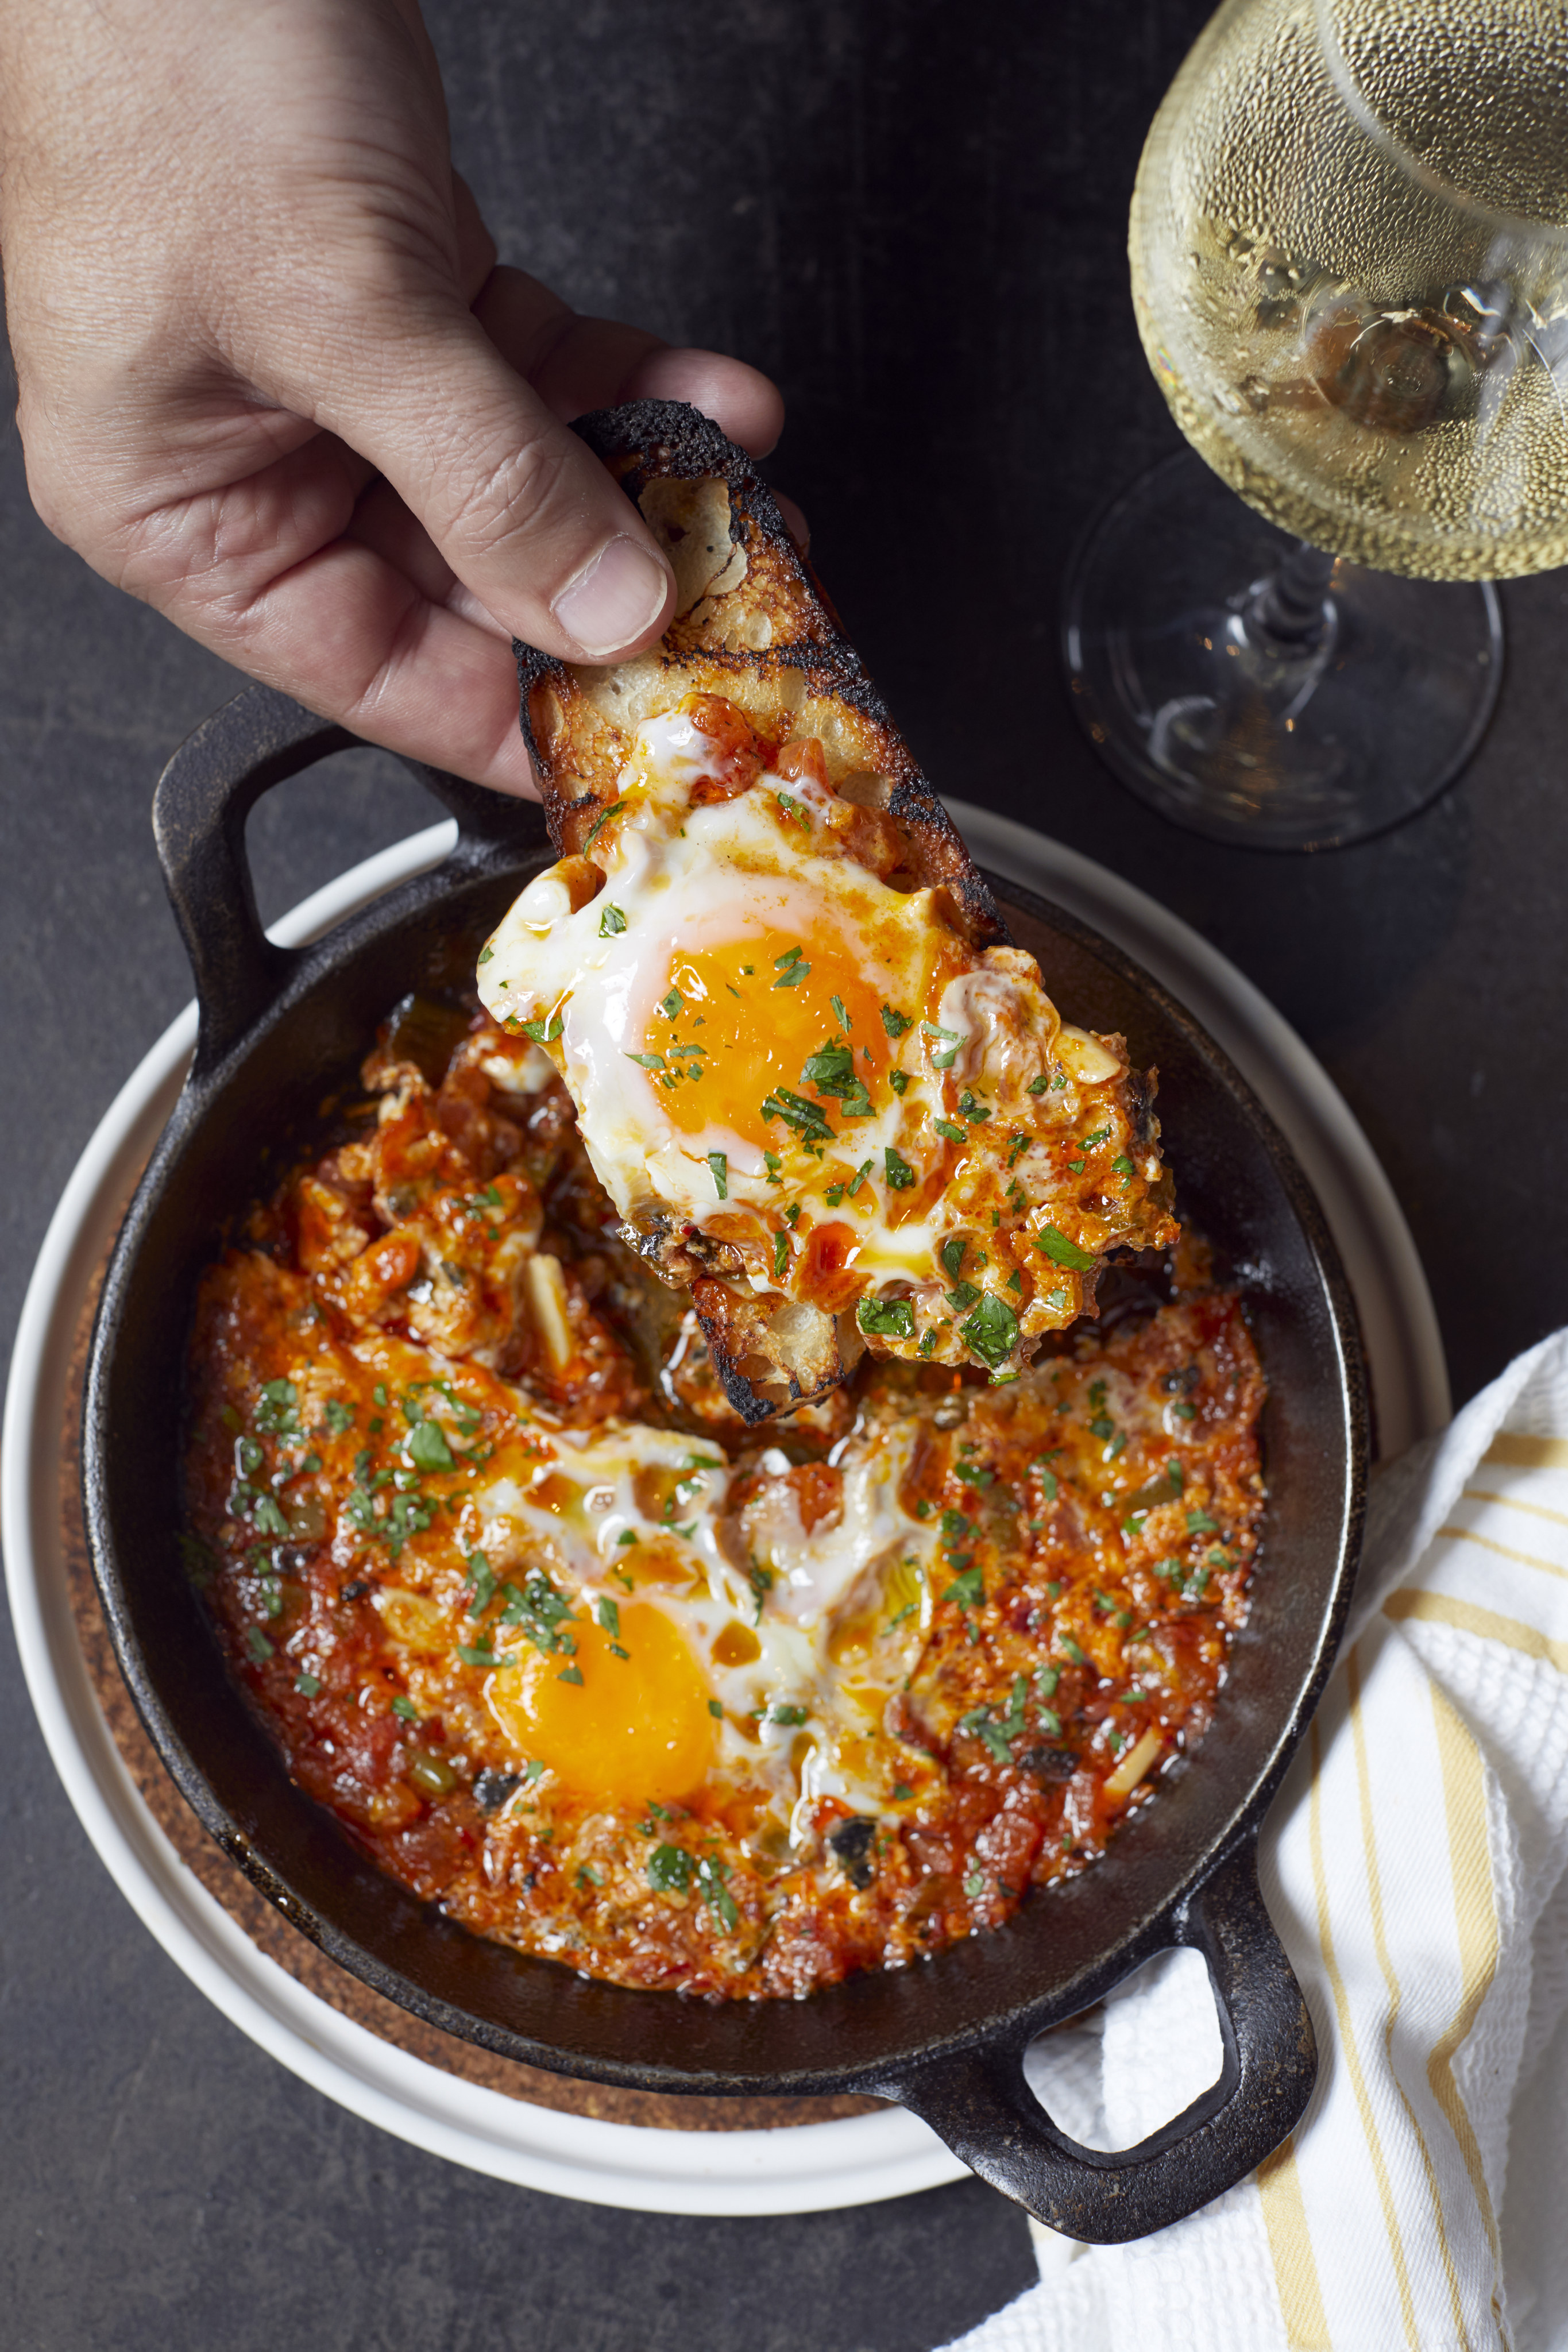 When it’s a hot summer day, Asher Goldstein, the Israeli executive chef of Hong Kong’s Francis and Francis West restaurants, likes to make shakshuka, a dish of baked eggs and tomatoes. Photo: Francis